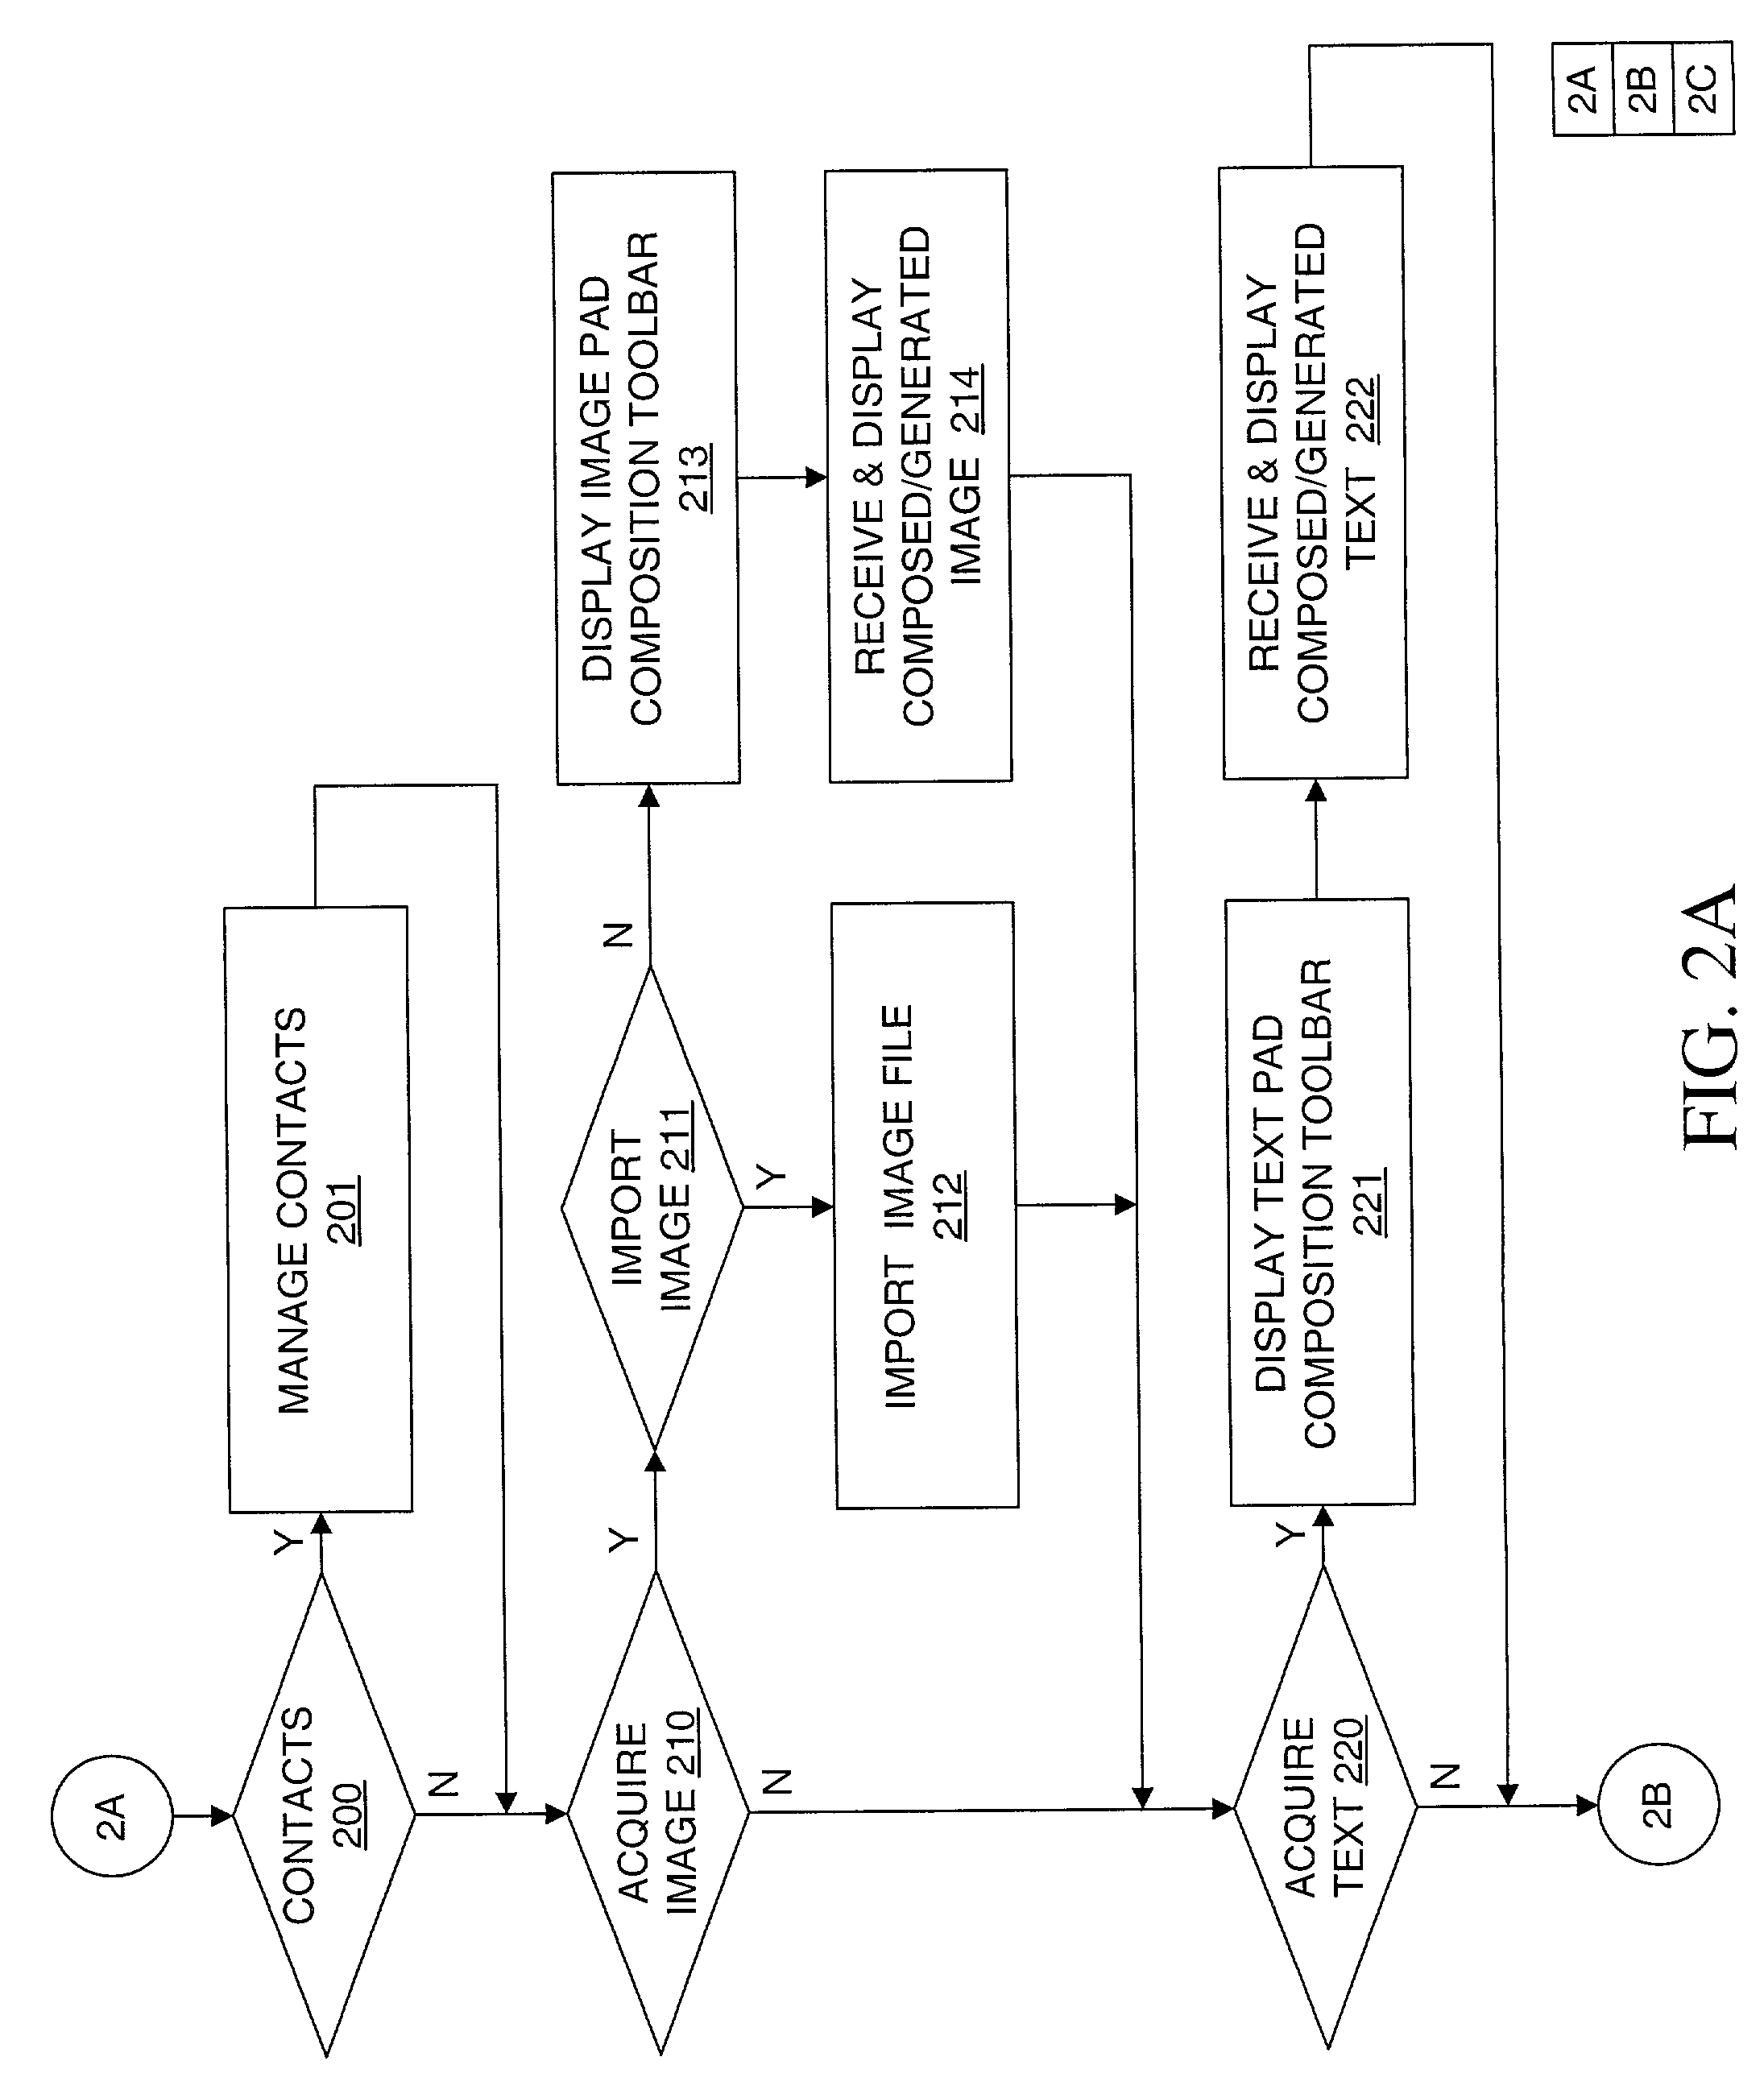 Method, apparatus and computer readable medium for multiple messaging session management with a graphical user interfacse